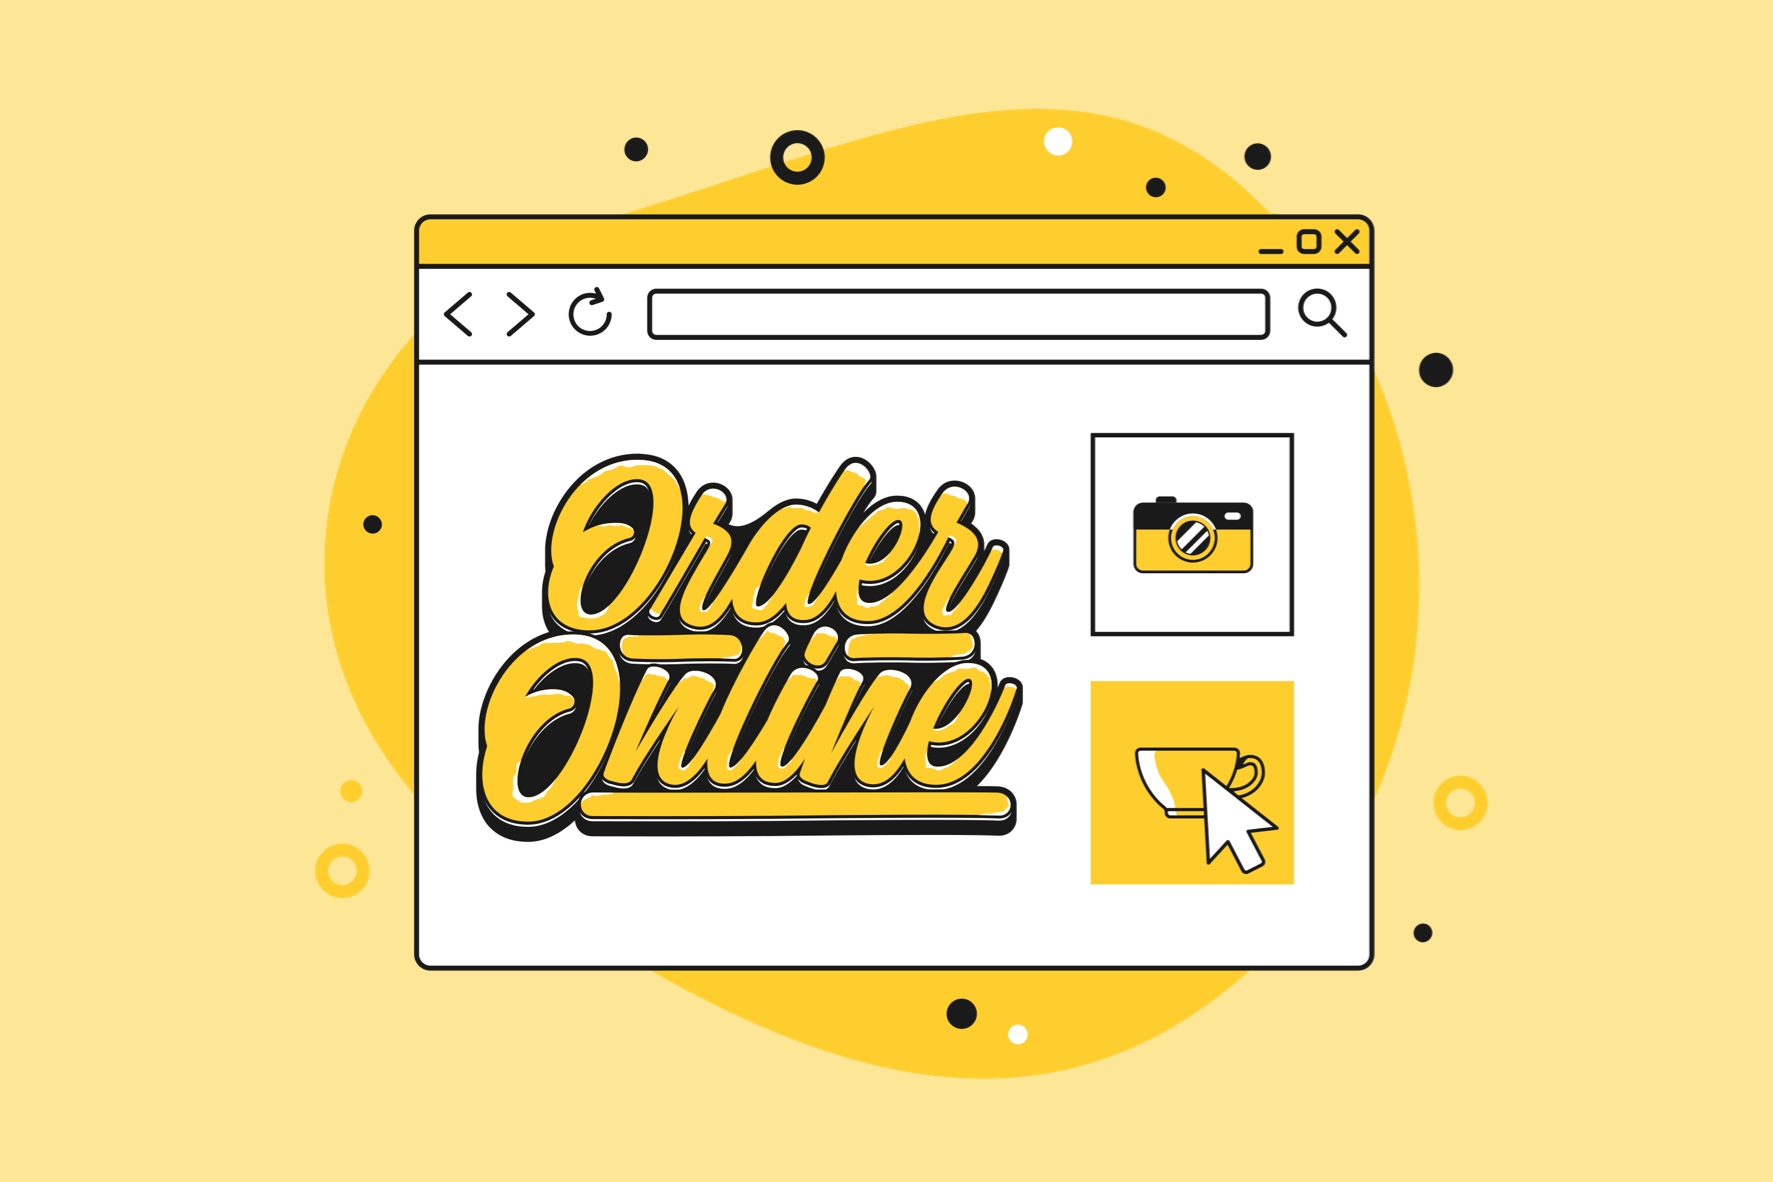 Google Ordering | How to Order with Google using Your Restaurant